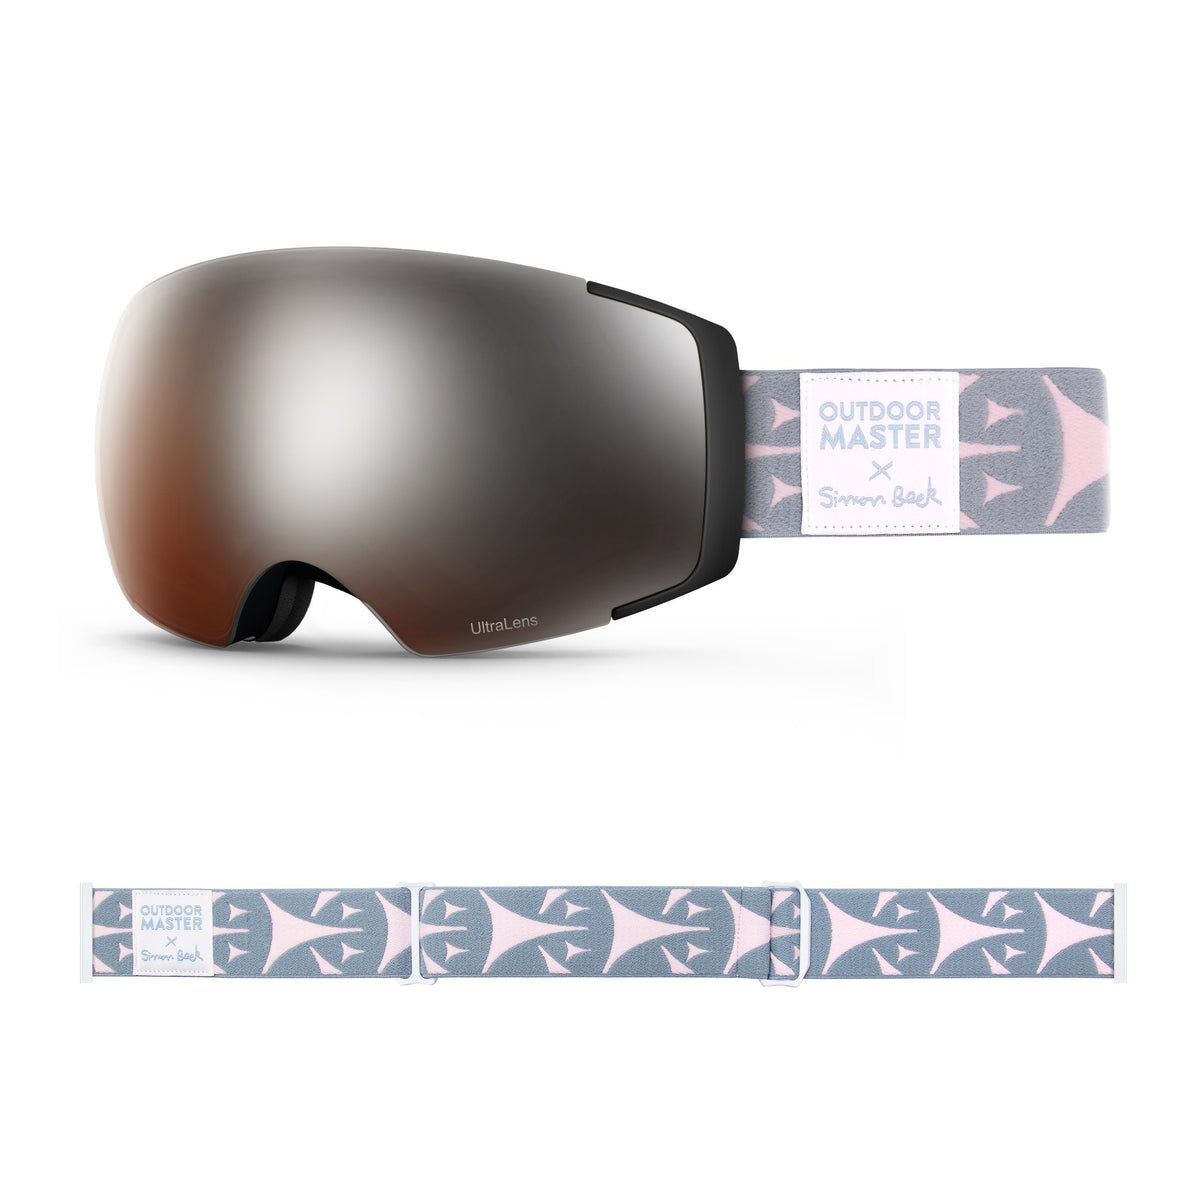 OutdoorMaster x Simon Beck Ski Goggles Pro Series - Snowshoeing Art Limited Edition OutdoorMaster LutraLens VLT 13% Optimized Orange with REVO Silver Bouncy Triangles